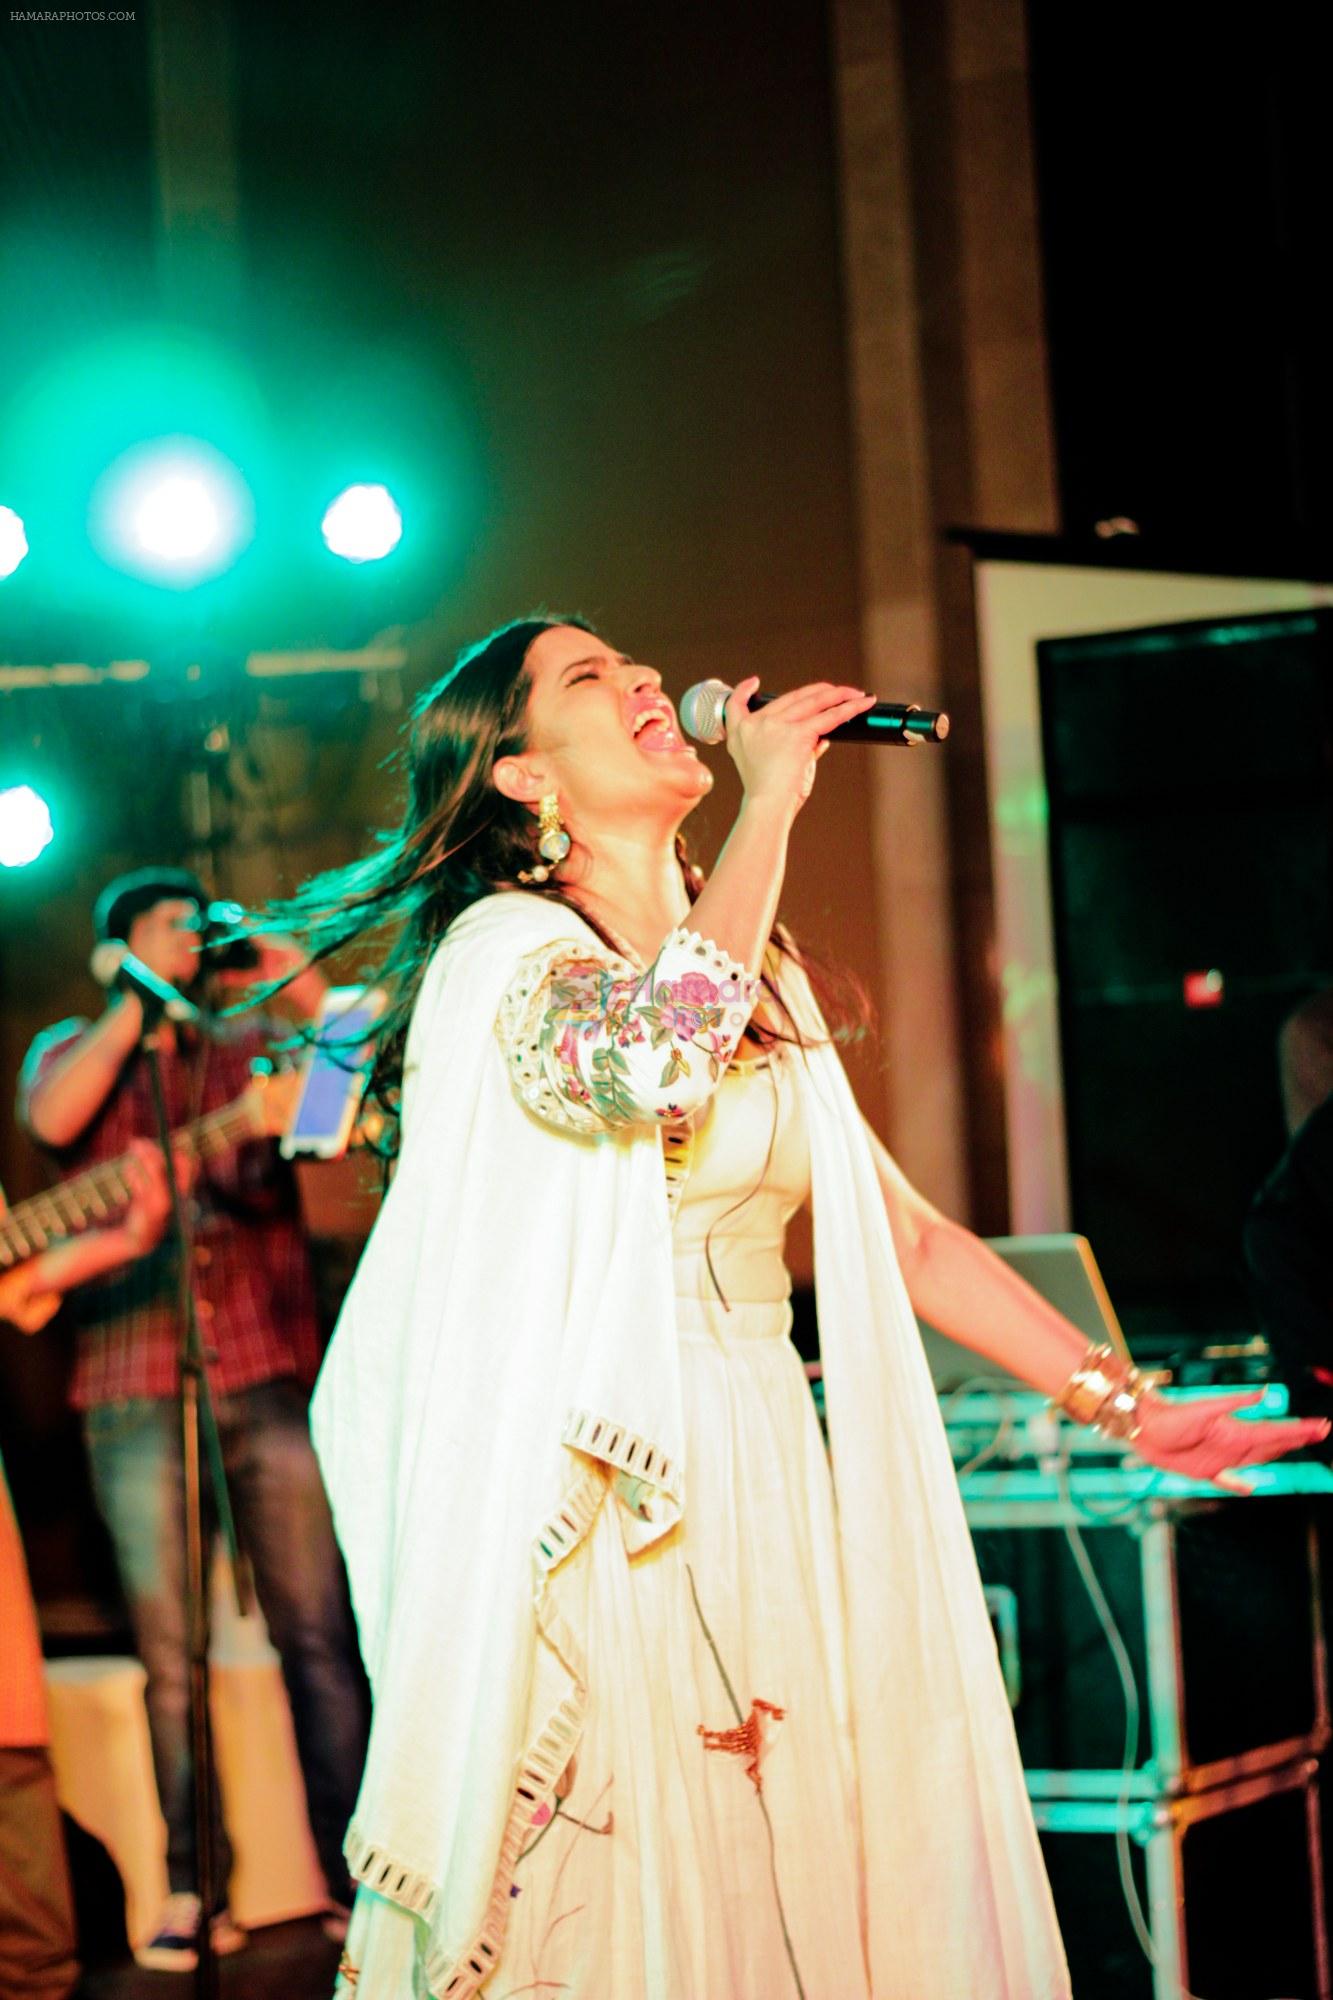 Sona Mohapatra performs for Womens Day 2015 in Mumbai on 4th March 2015